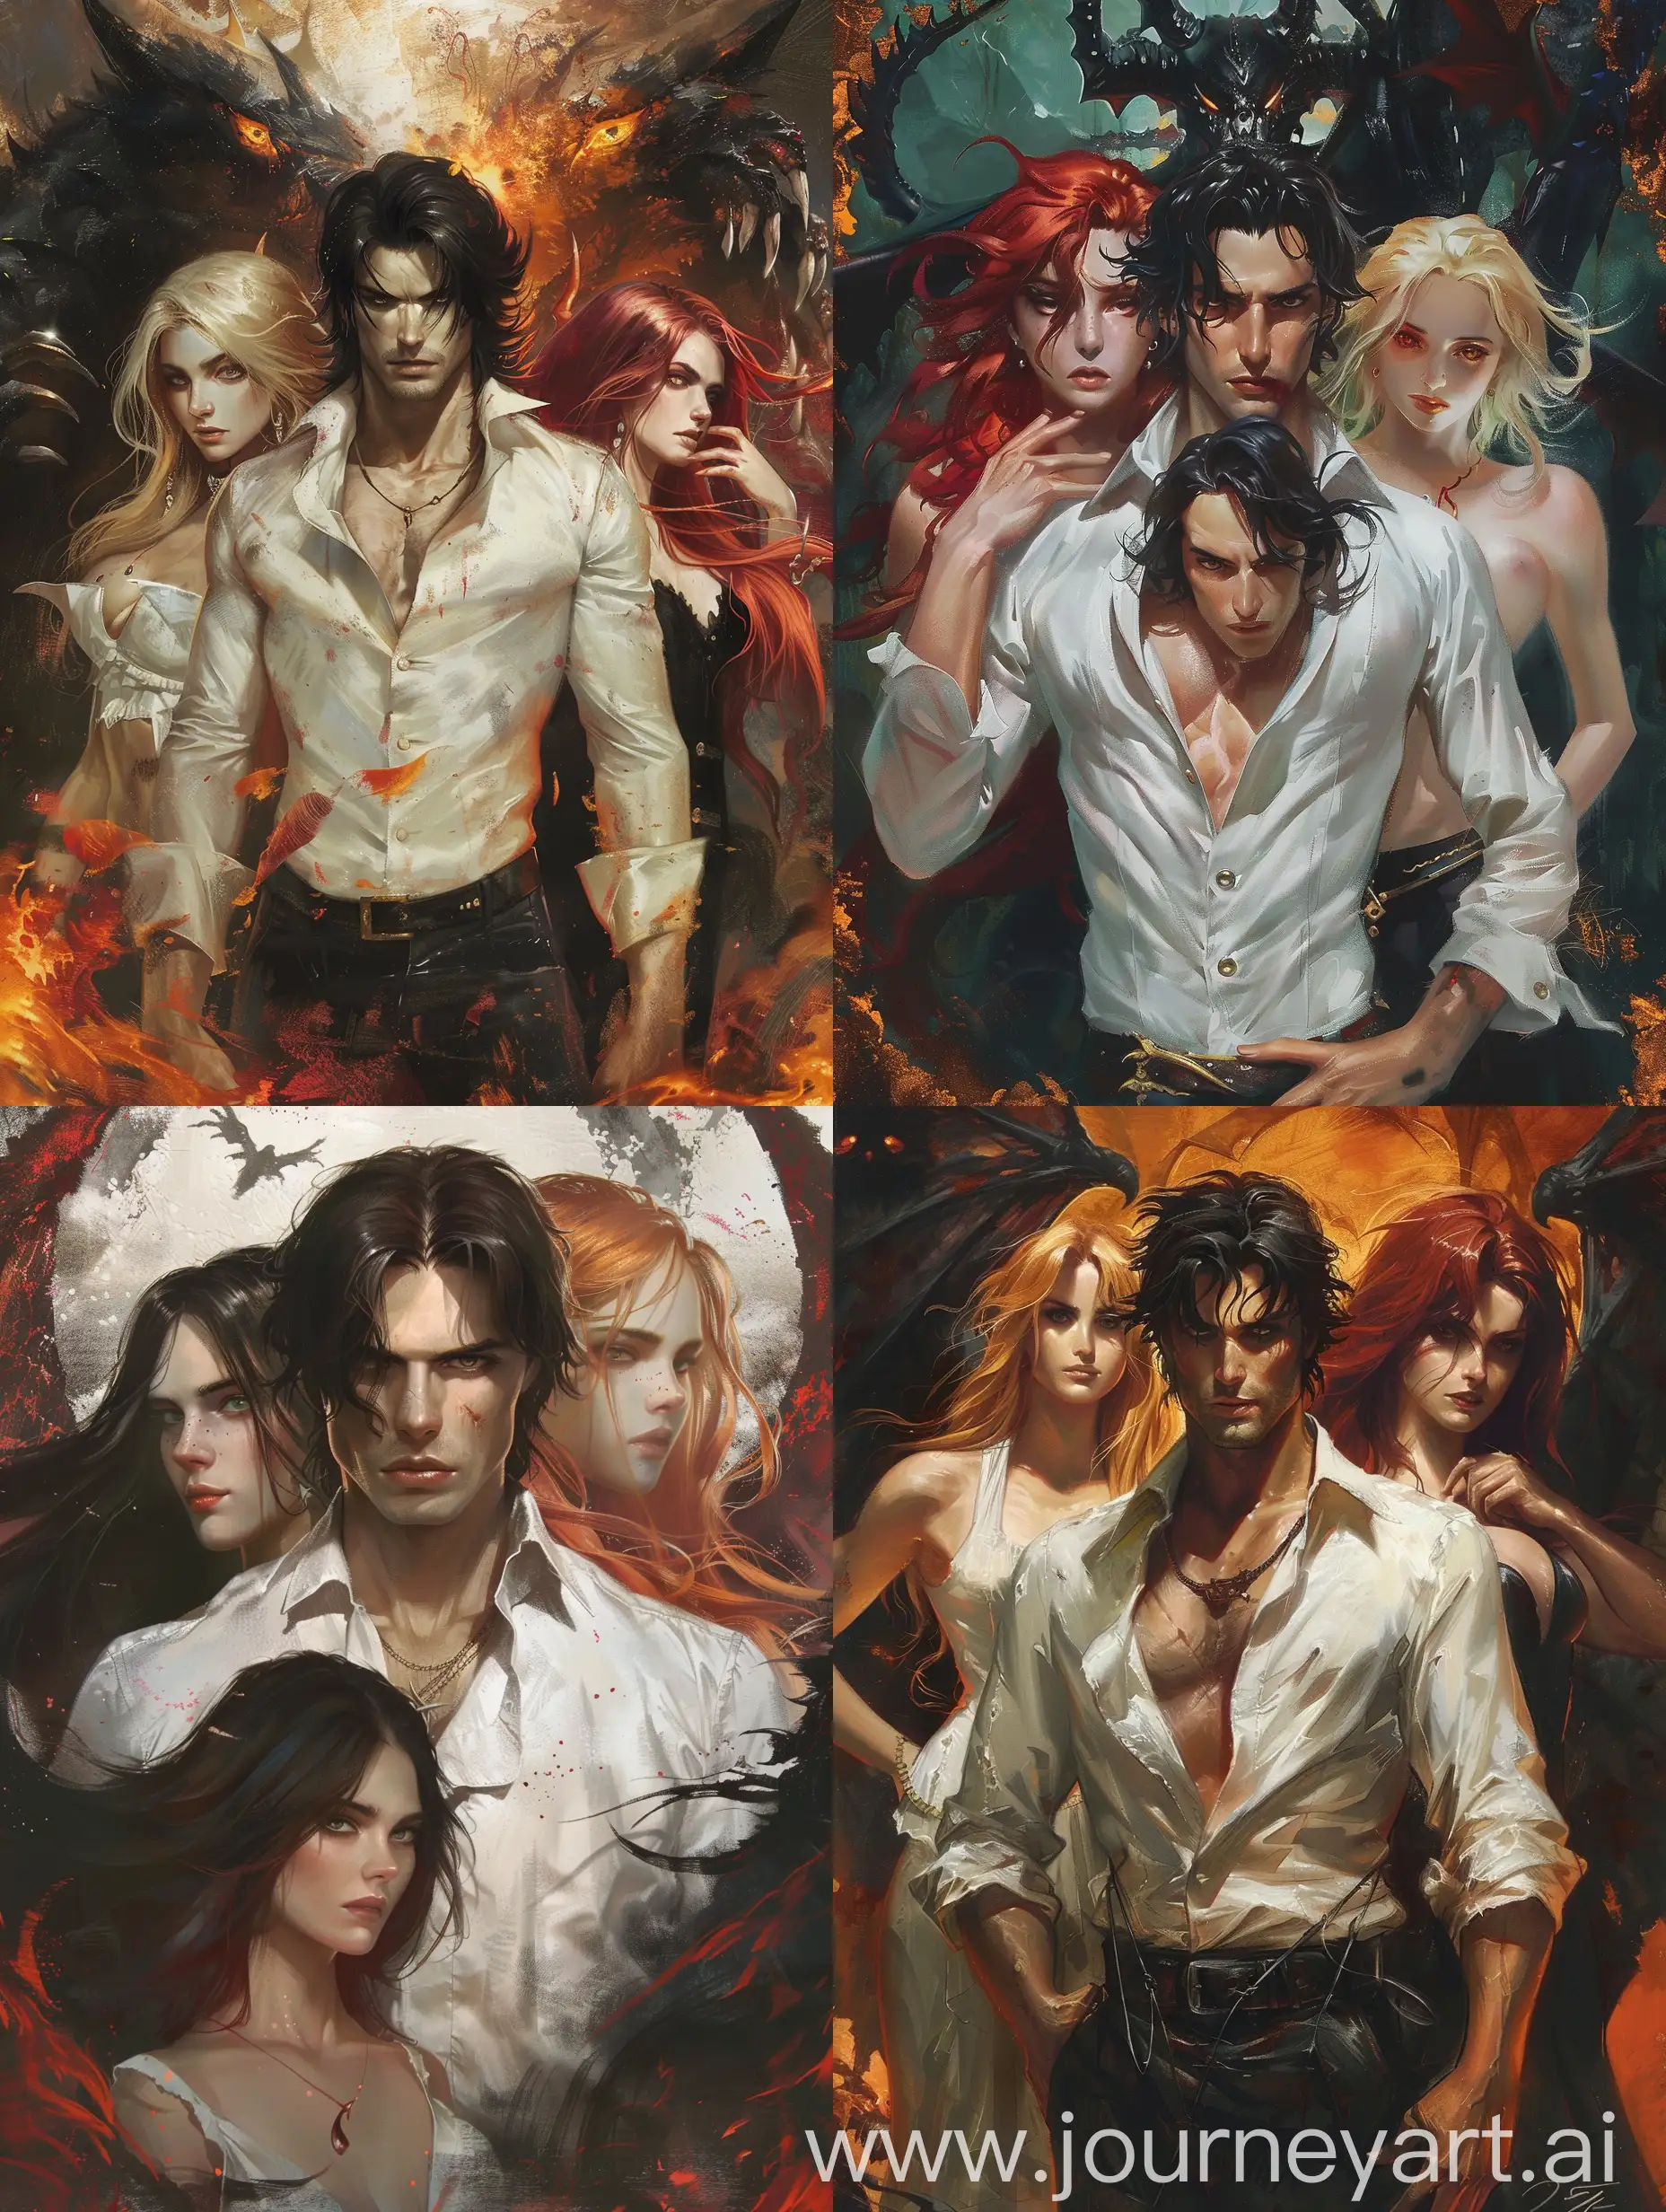 Fantasy-Novel-Cover-Man-with-Black-Hair-Blonde-Girl-and-RedHaired-Girl-Confronting-Demon-Boss